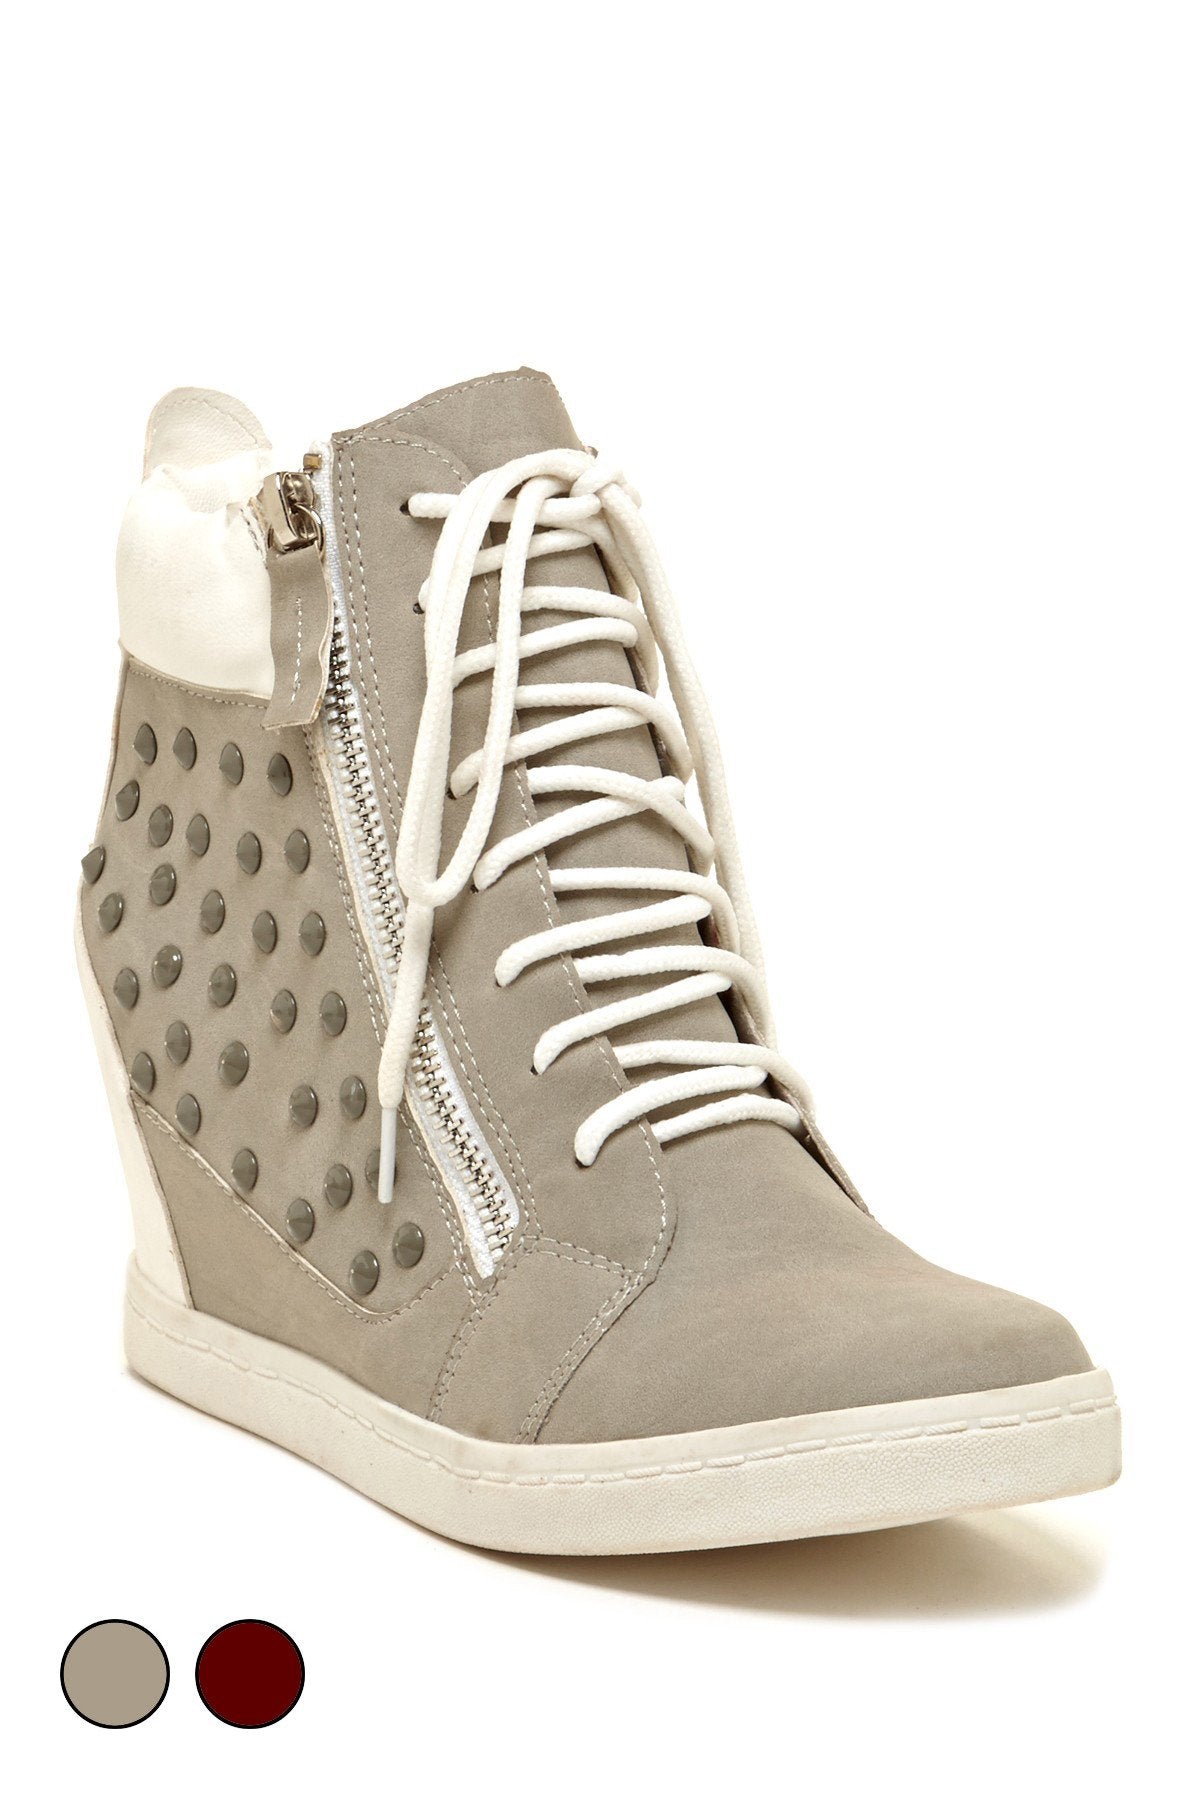 A gray DUPREE sneaker with silver studs, white laces, and side zipper detail, displayed on a white background.